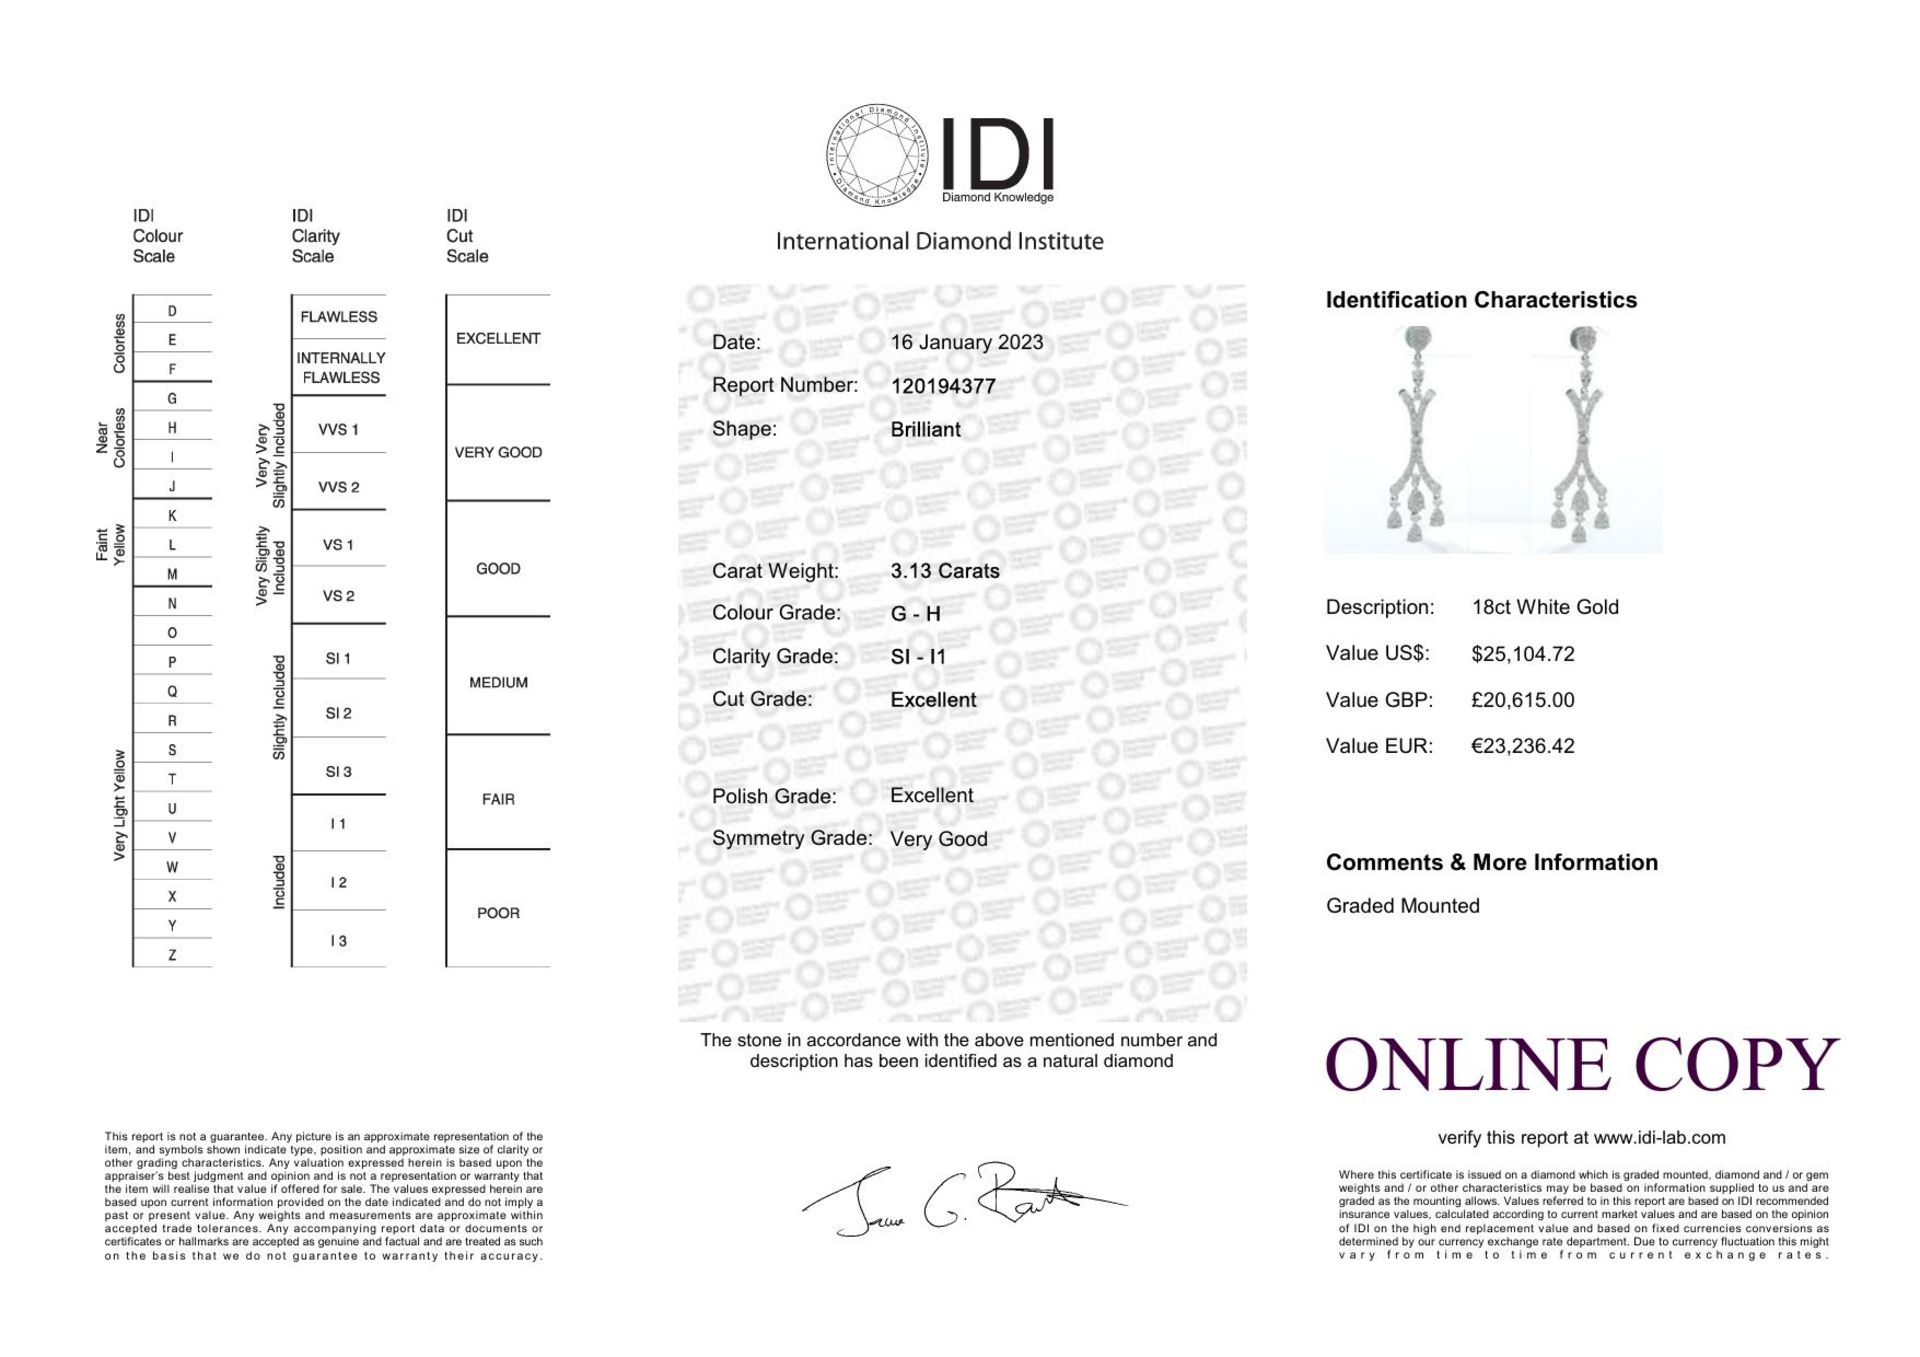 18ct White Gold Cluster Diamond Earring 3.13 Carats - Valued By IDI £20,615.00 - Eighty round - Image 4 of 4